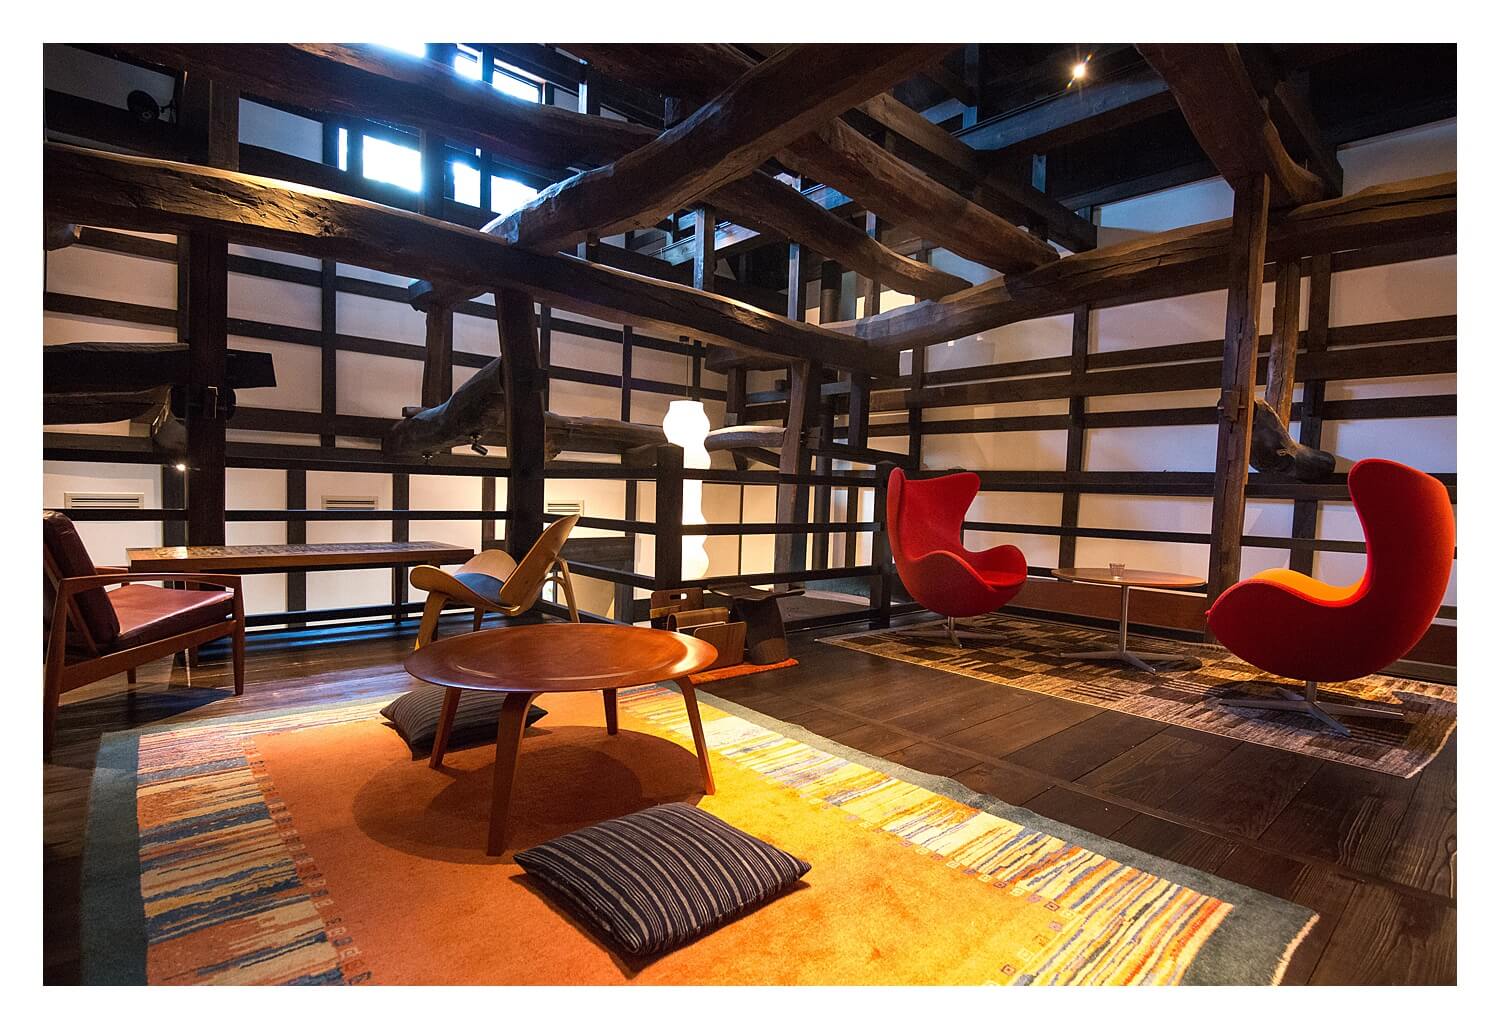  Traditional meets modern - This luxury hotel is a beautiful ryokan with the most amazing onsen. It’s only 2 hours away from Tokyo! | Japan, photography diary , landscape 